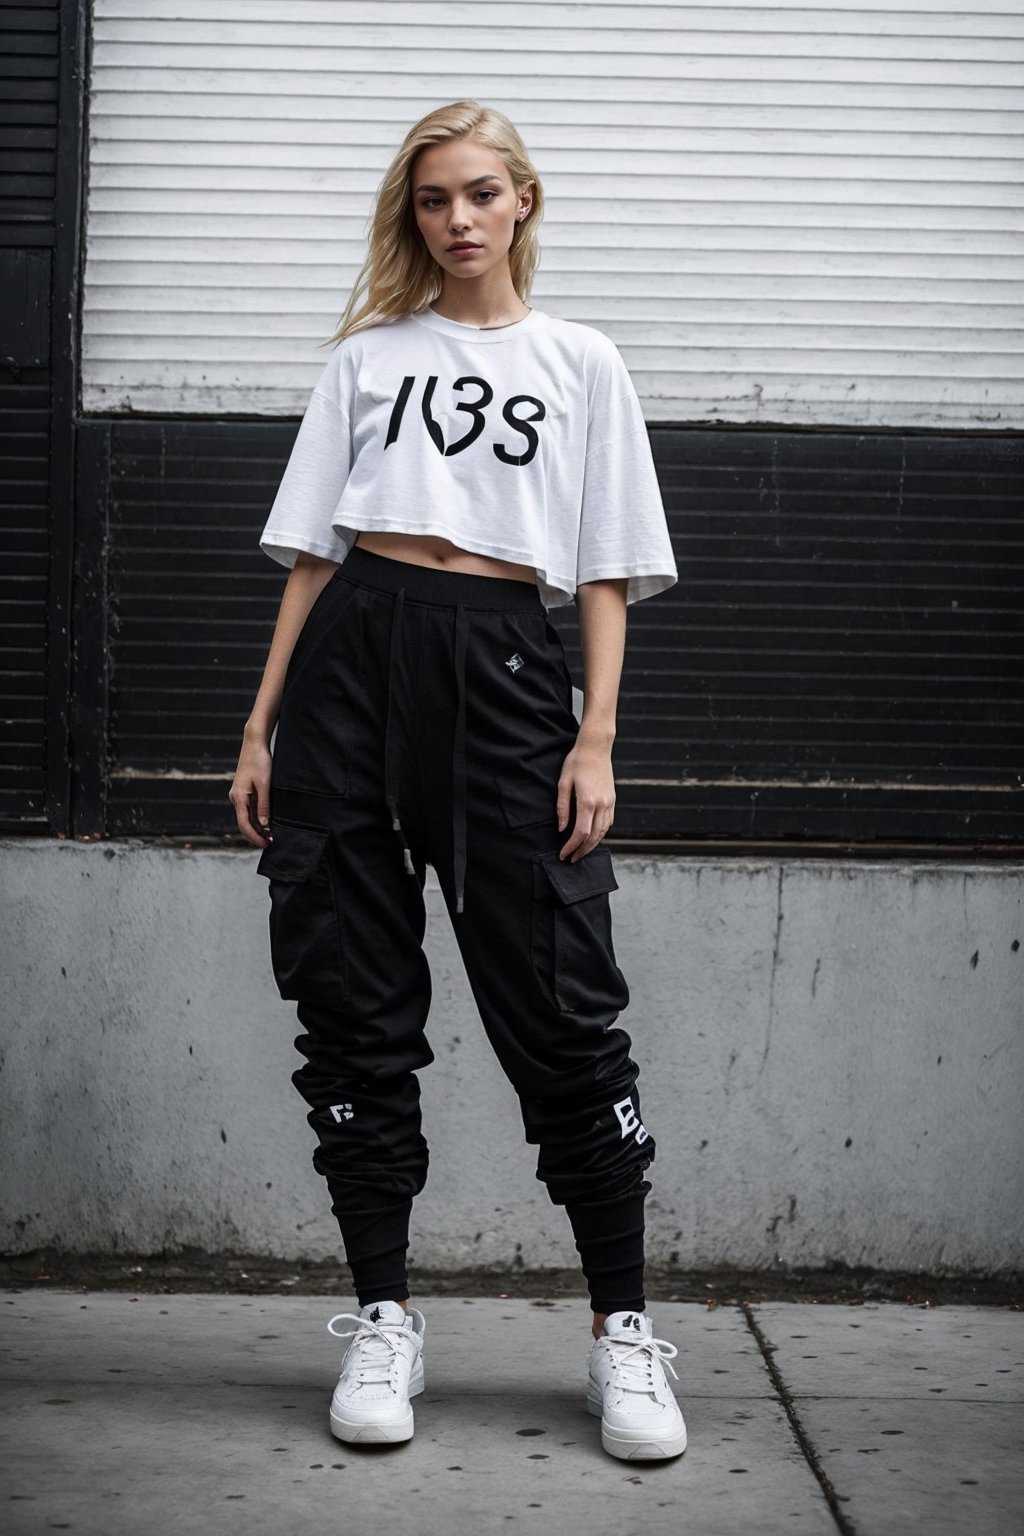 1girl, young white girl, hot top model, long blonde hair, wearing a white oversize t shirt (t shirt only white color) and Acronym J36-S black pants and Acronym P30A-DS and black and white sneakers, in city, instagram model, 80mm,urban techwear